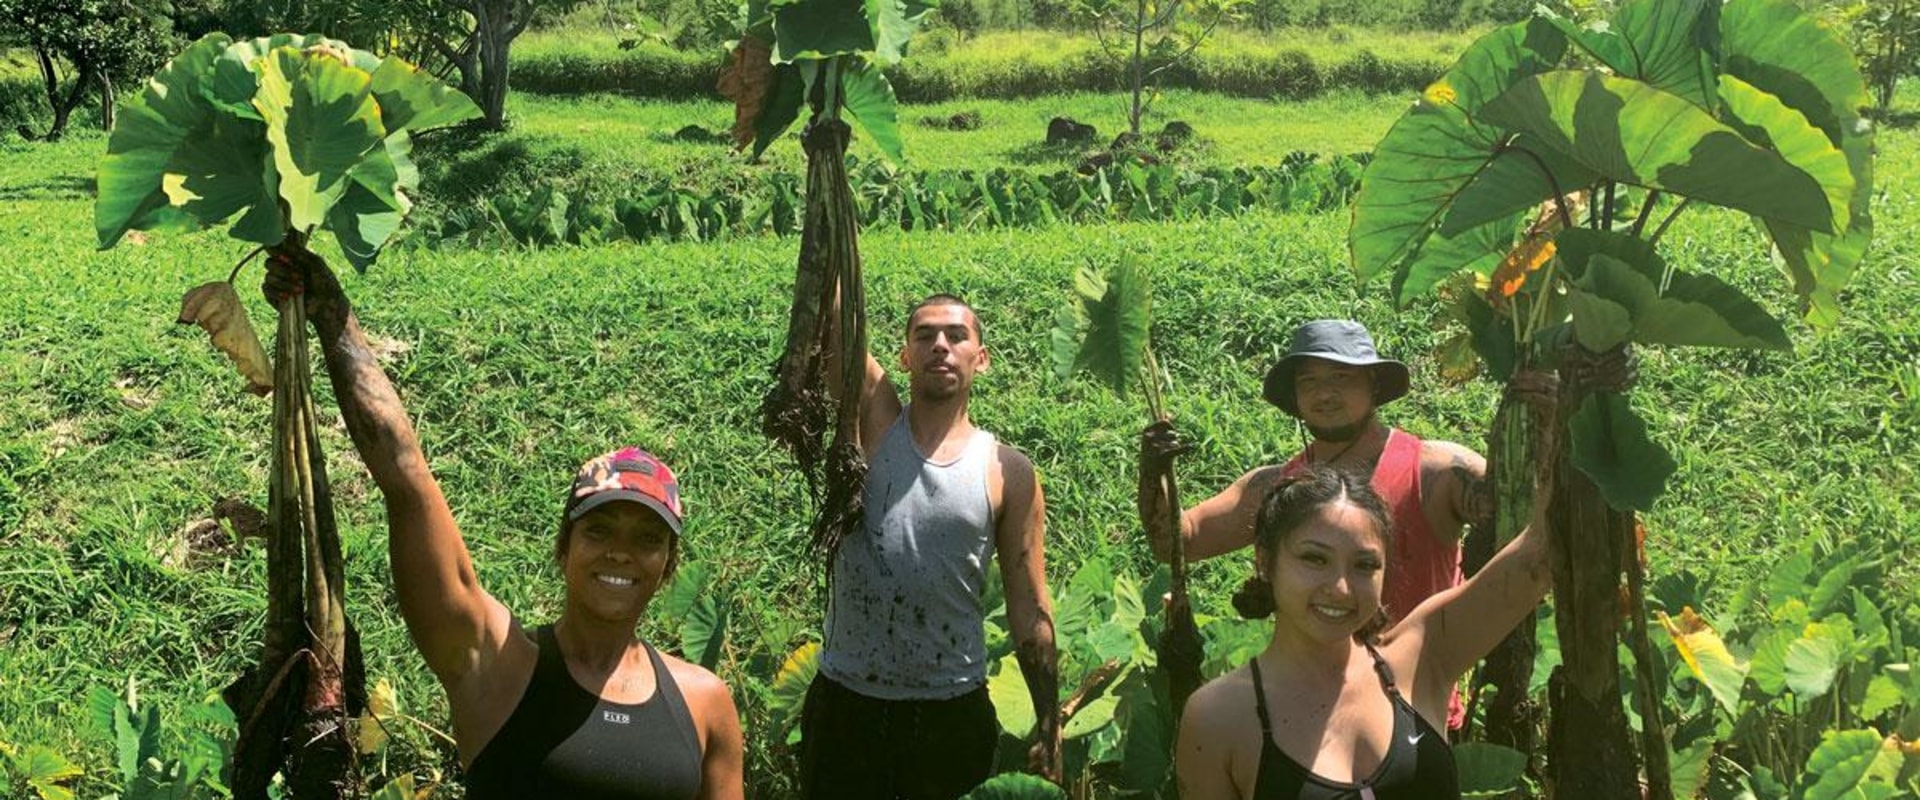 The Role of Traditional Knowledge and Practices in Hawaii's Food System